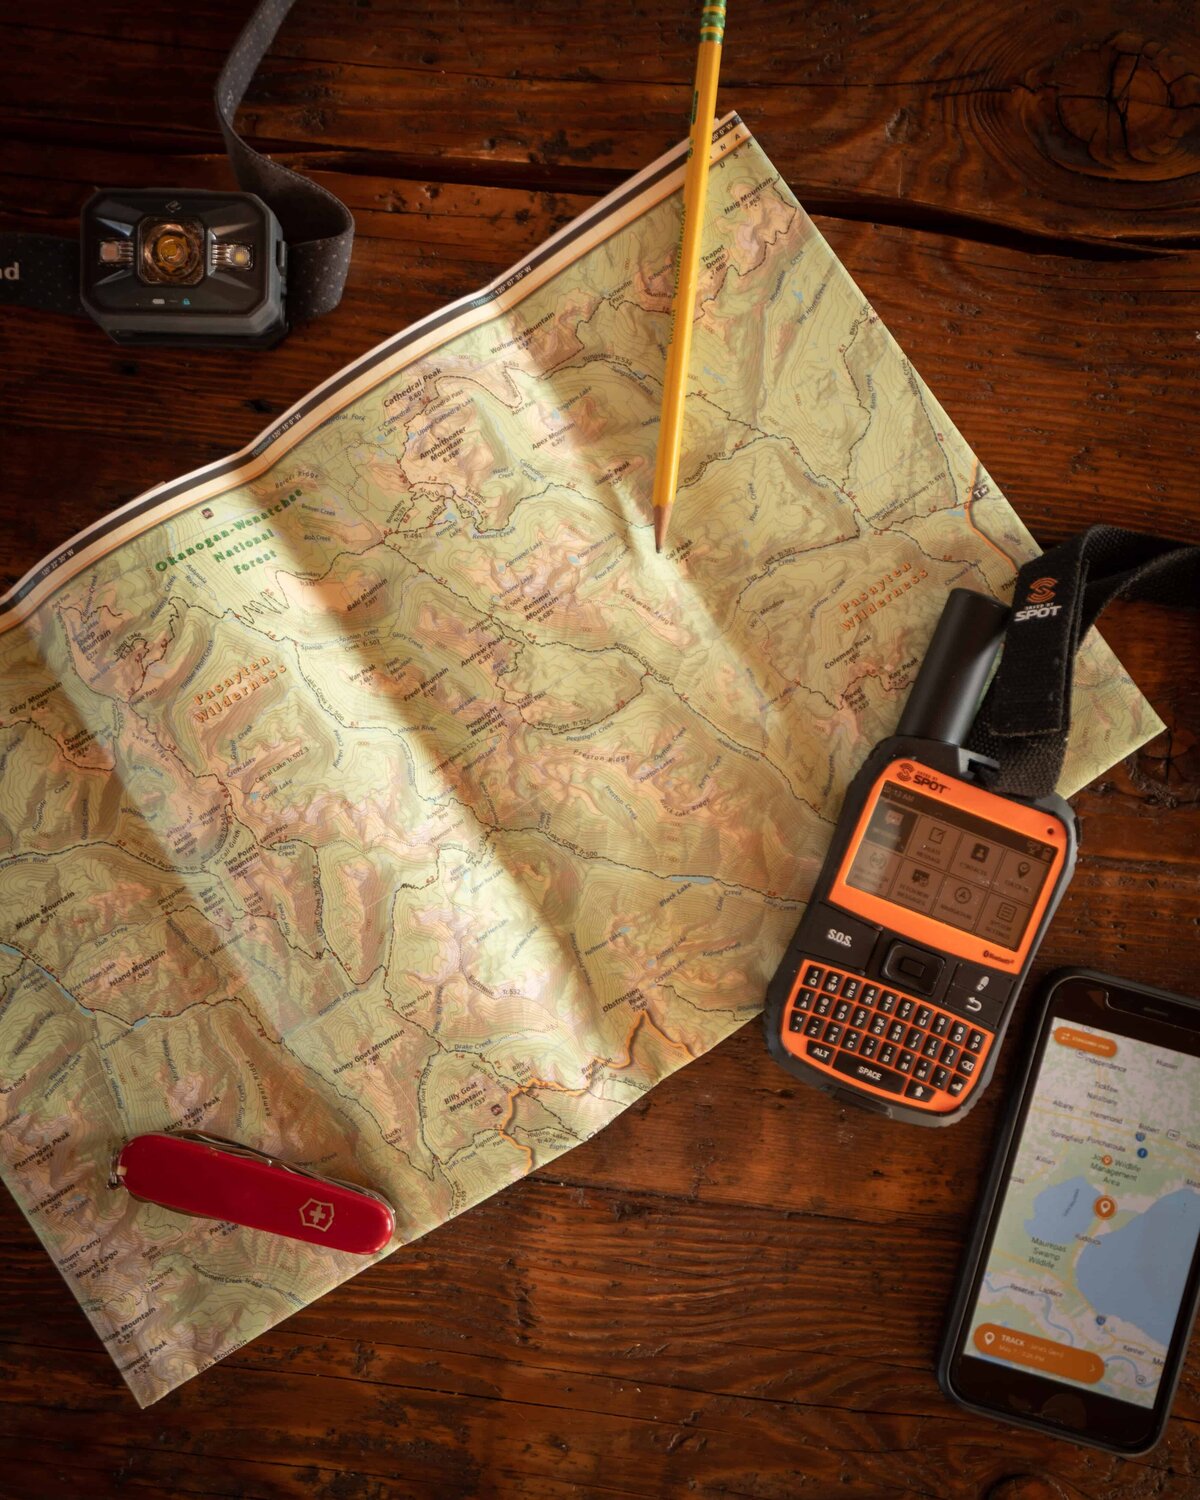 Orange SPOT GPS on a map on a wooden table